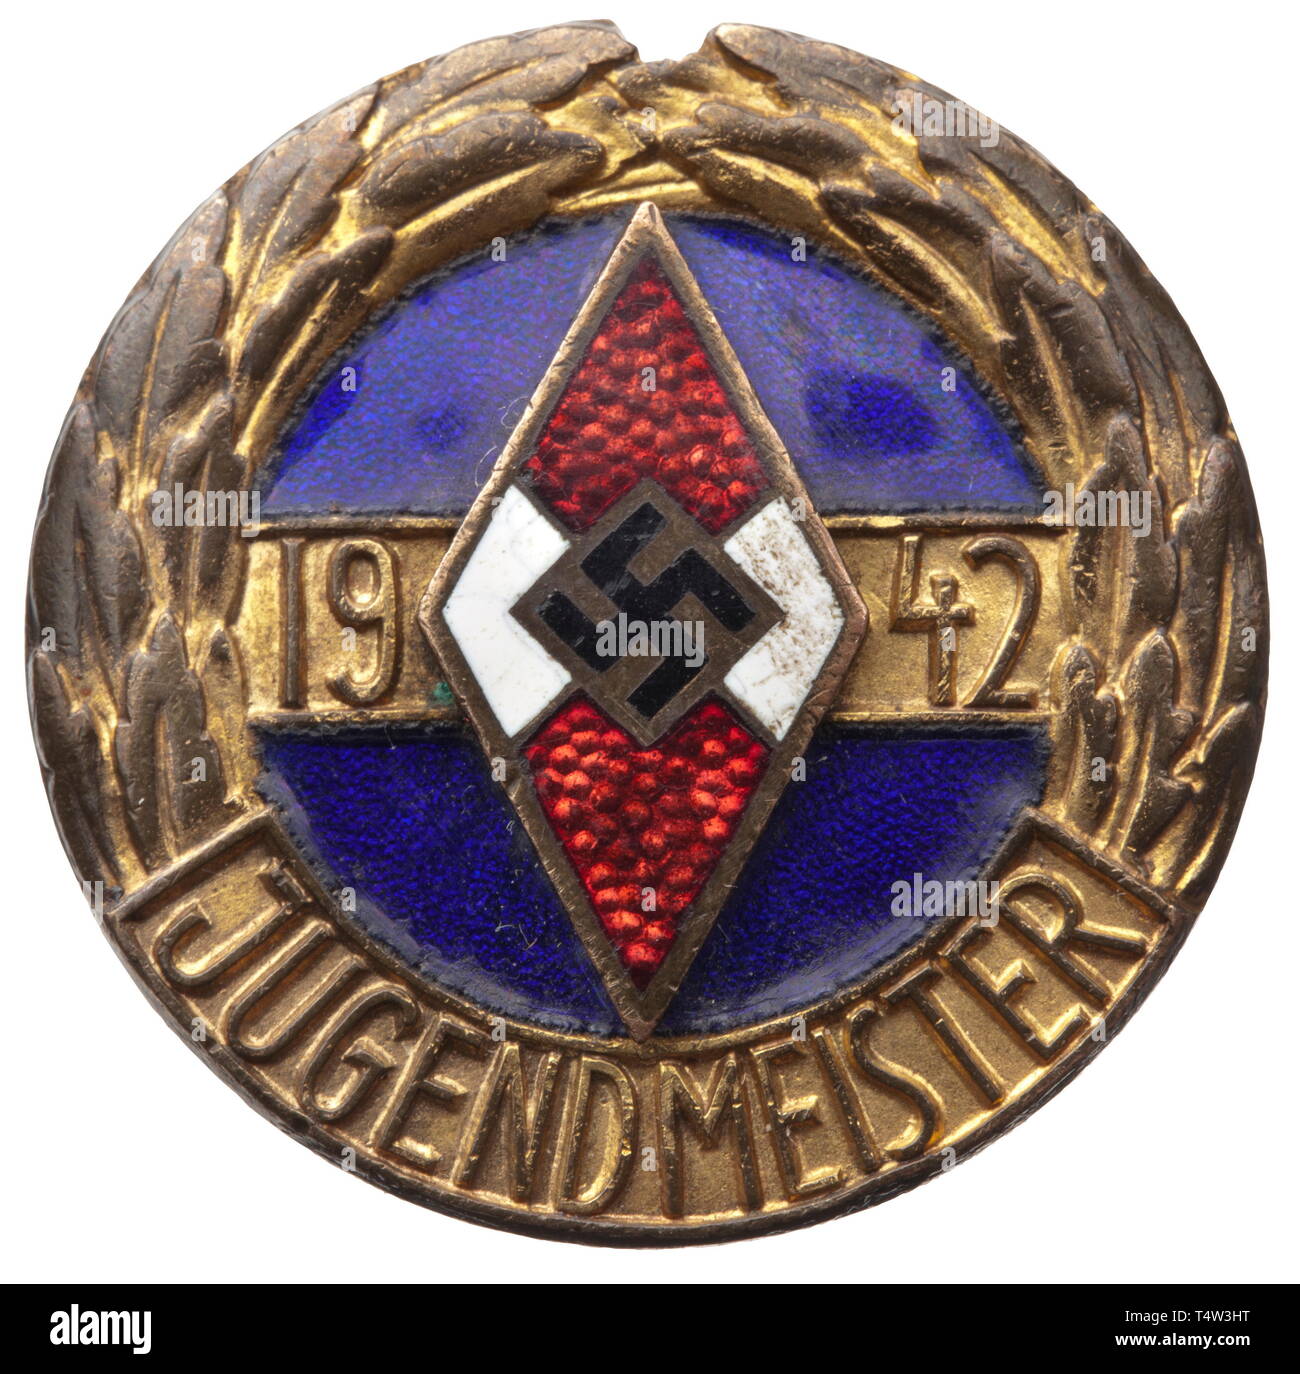 A Hitler Youth Championship Badge, a Badge of the German Youth Champion 1942 in Gold, gilt and enamelled iron with reverse pin attachment (Nie 6.06.60,a). Extremely rare. historic, historical, 20th century, 1930s, League of German Girls, Band of German Maidens, youth organization, youth organizations, NS, National Socialism, Nazism, Third Reich, German Reich, Germany, National Socialist, Nazi, Nazi period, utensil, piece of equipment, utensils, object, objects, stills, clipping, clippings, cut out, cut-out, cut-outs, Editorial-Use-Only Stock Photo